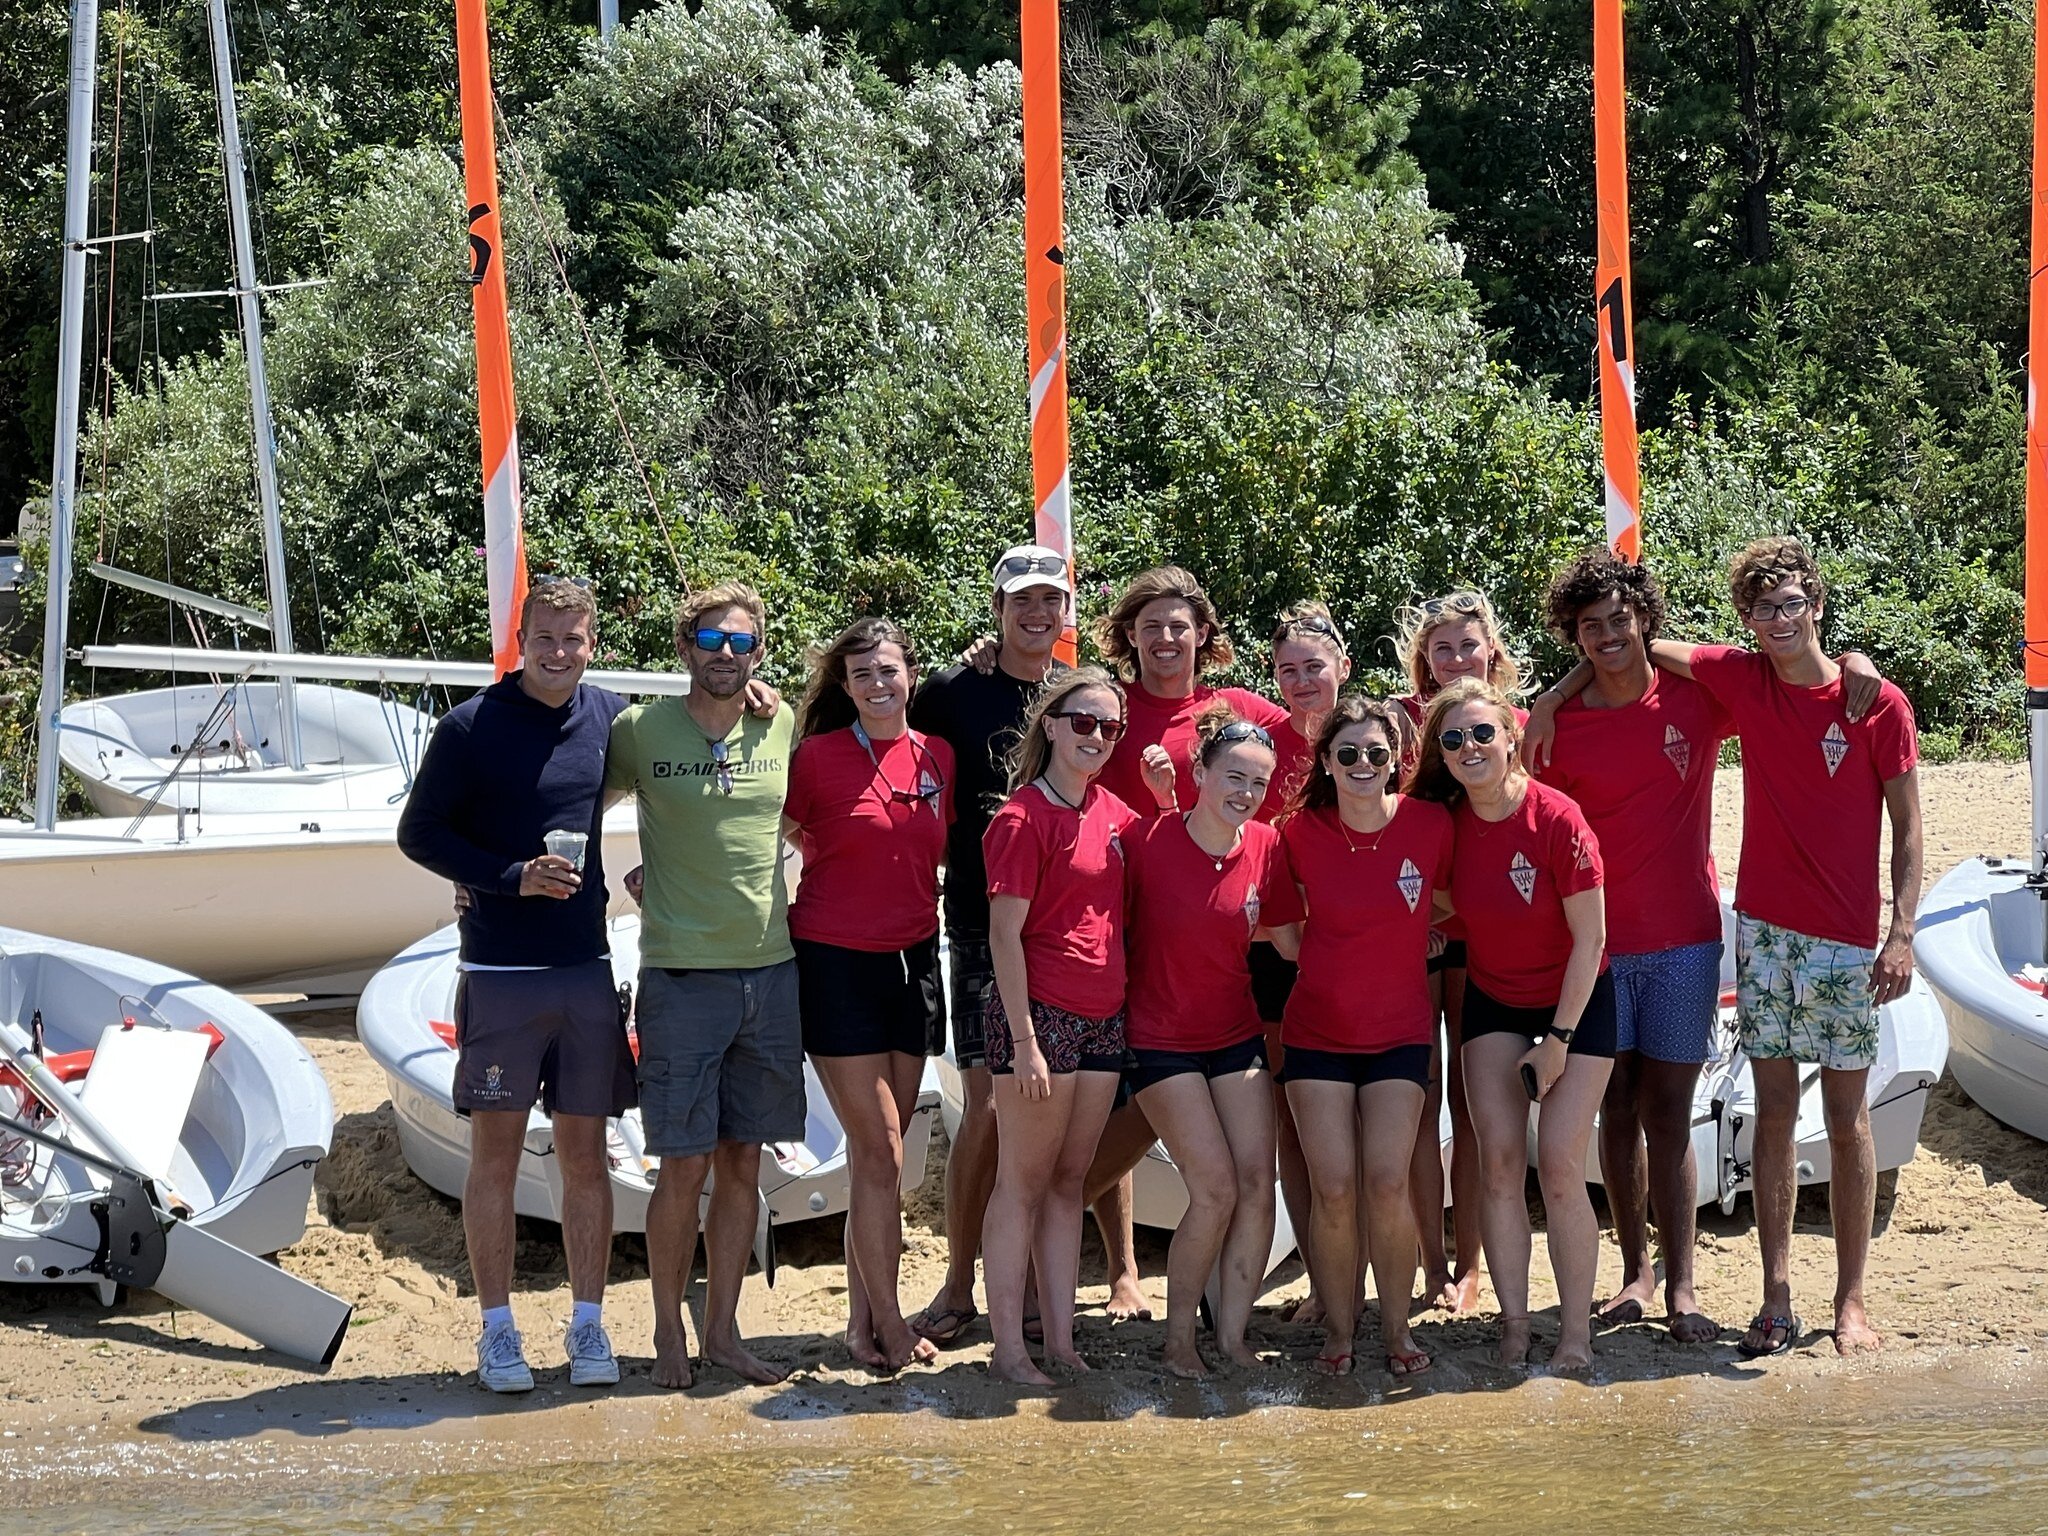 Thank you to the crew at SailMV for all their hard work this season. SailMV has been fostering the island's maritime heritage and teaching kids and adults to sail since 1992. Island Girl Excursions is proud to support this amazing Vineyard organizati